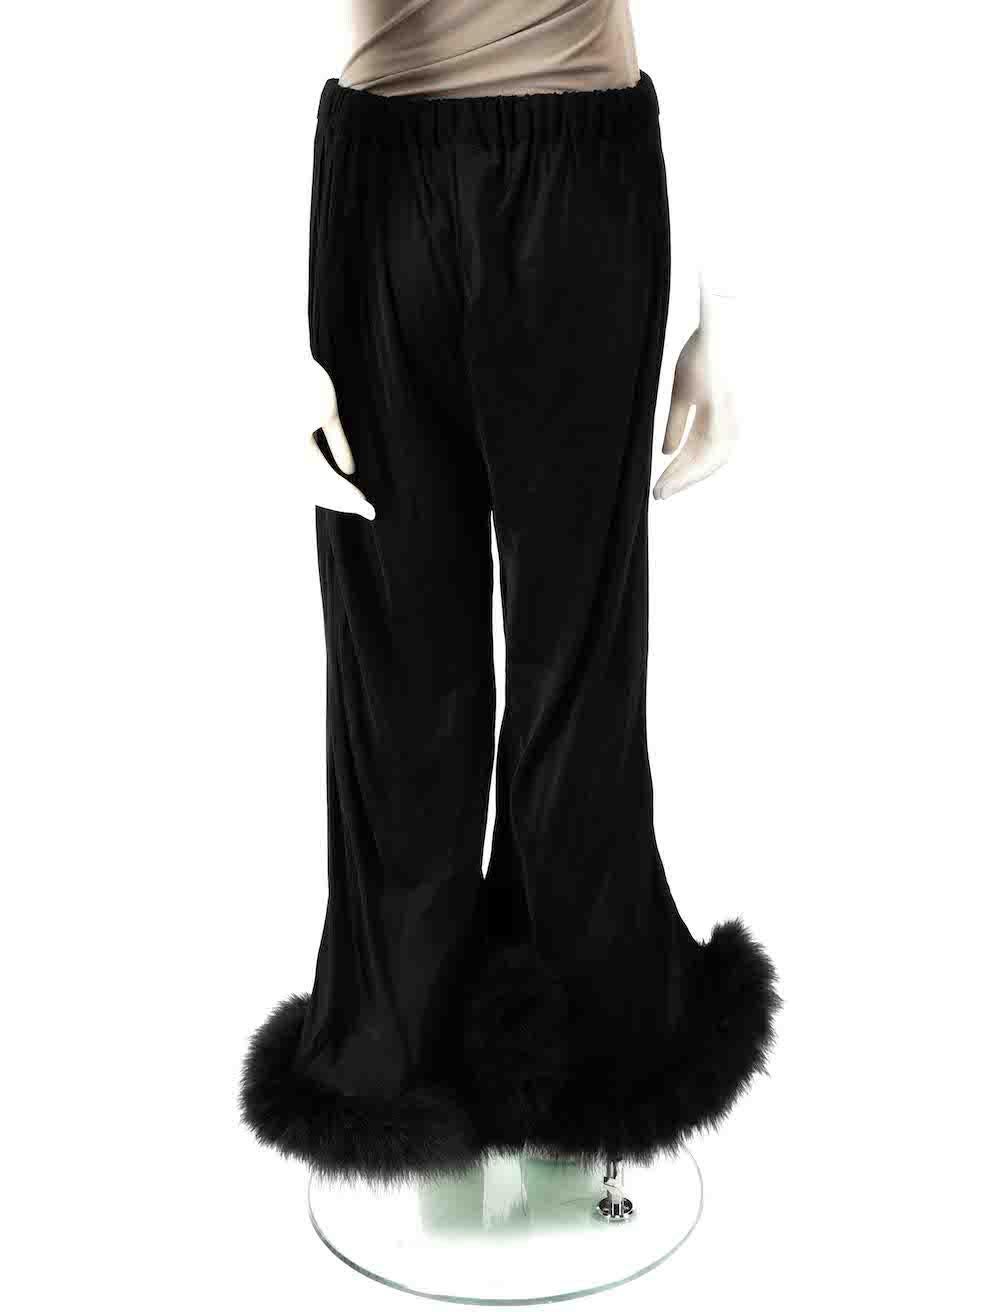 Sleeper Black Feather Trimmed Boudoir Trousers Size S In Good Condition For Sale In London, GB